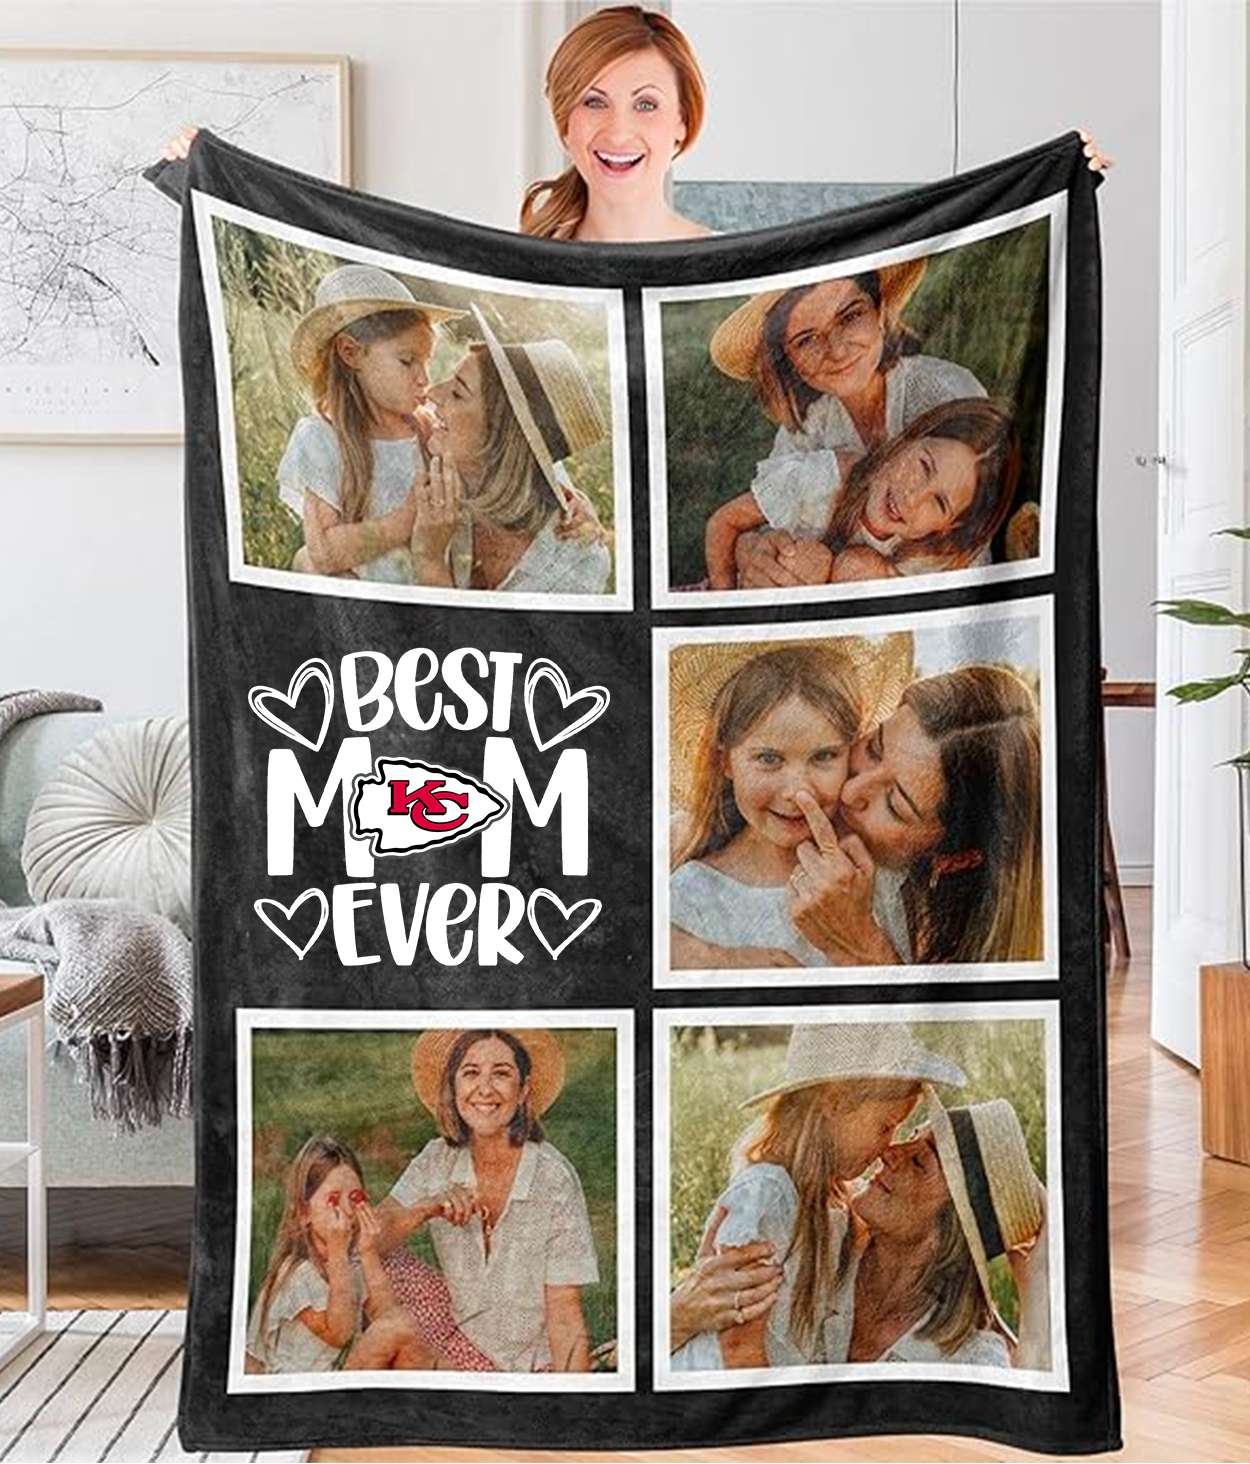 Best Mom Ever - Custom NFL Kansas City Chiefs Blankets with Pictures for Mother's Day Gift